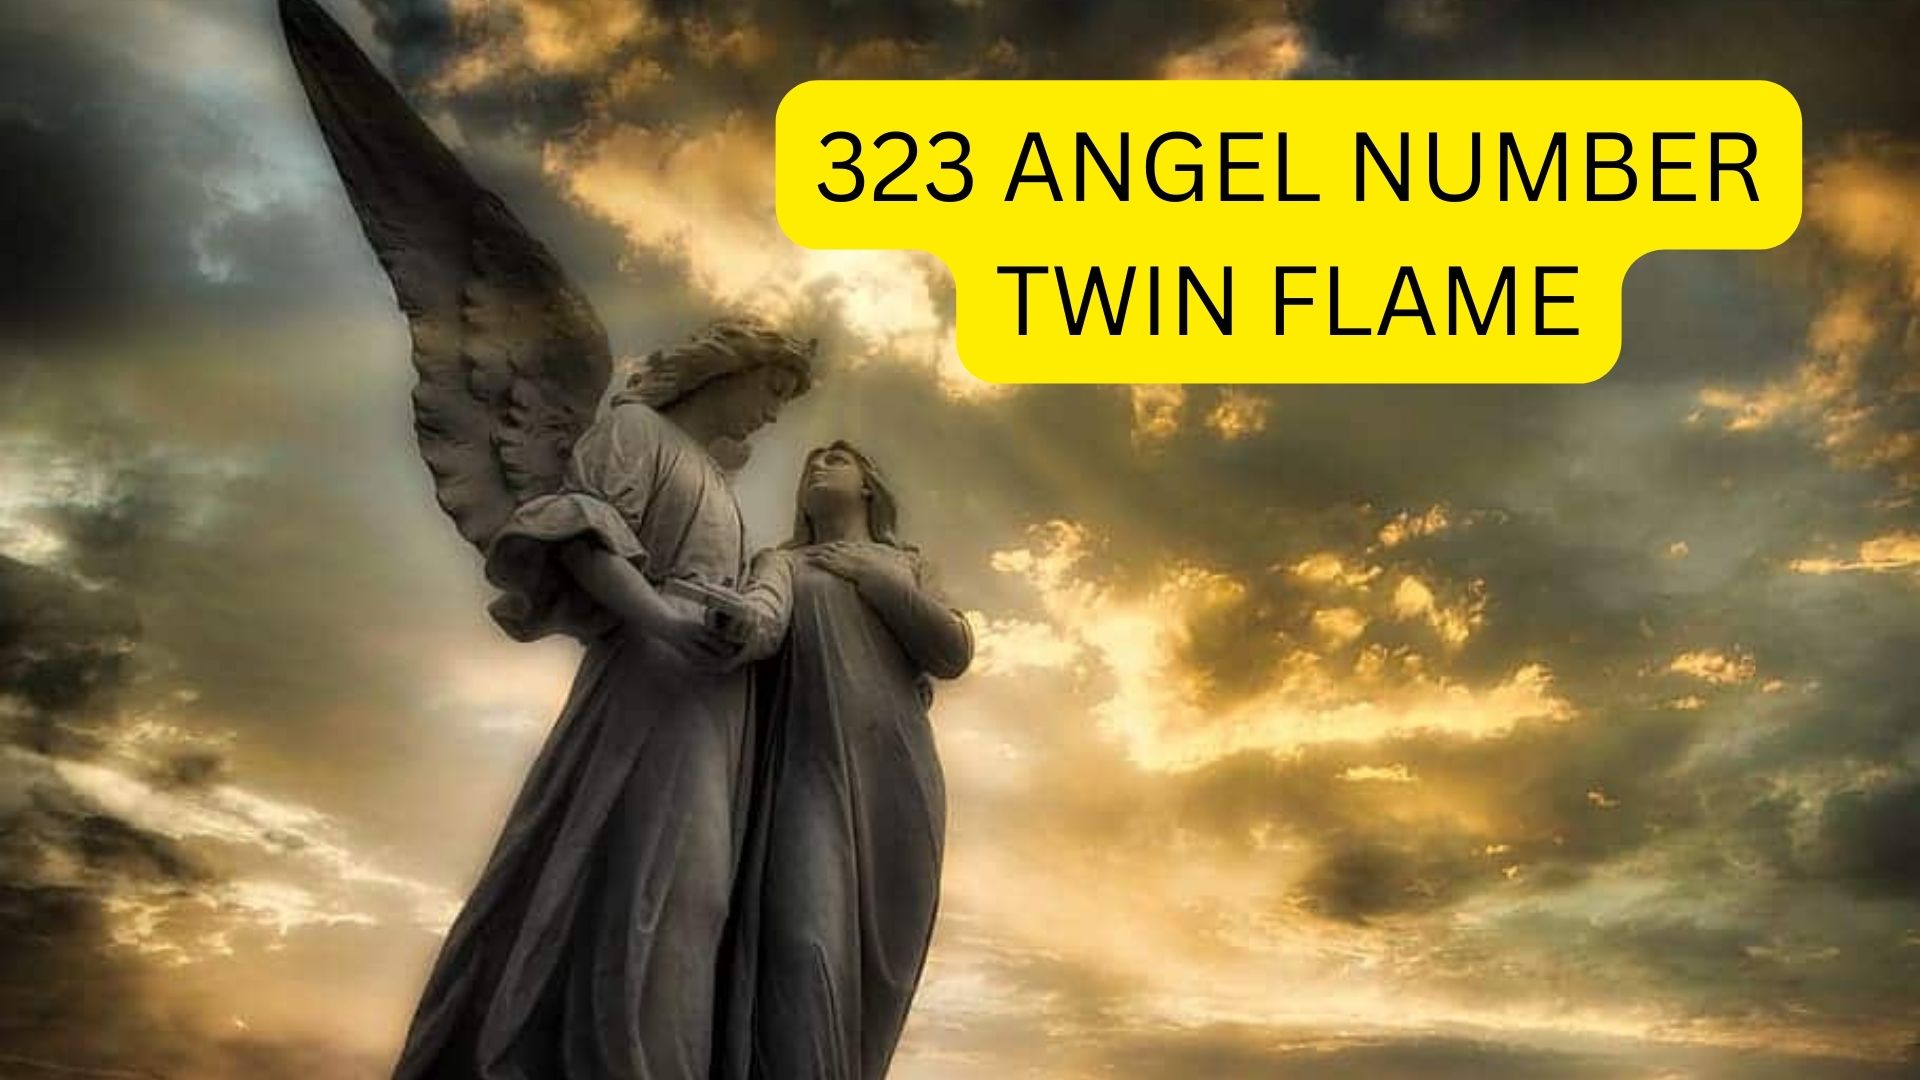 323 Angel Number Twin Flame - A Divine Message To Stay Positive